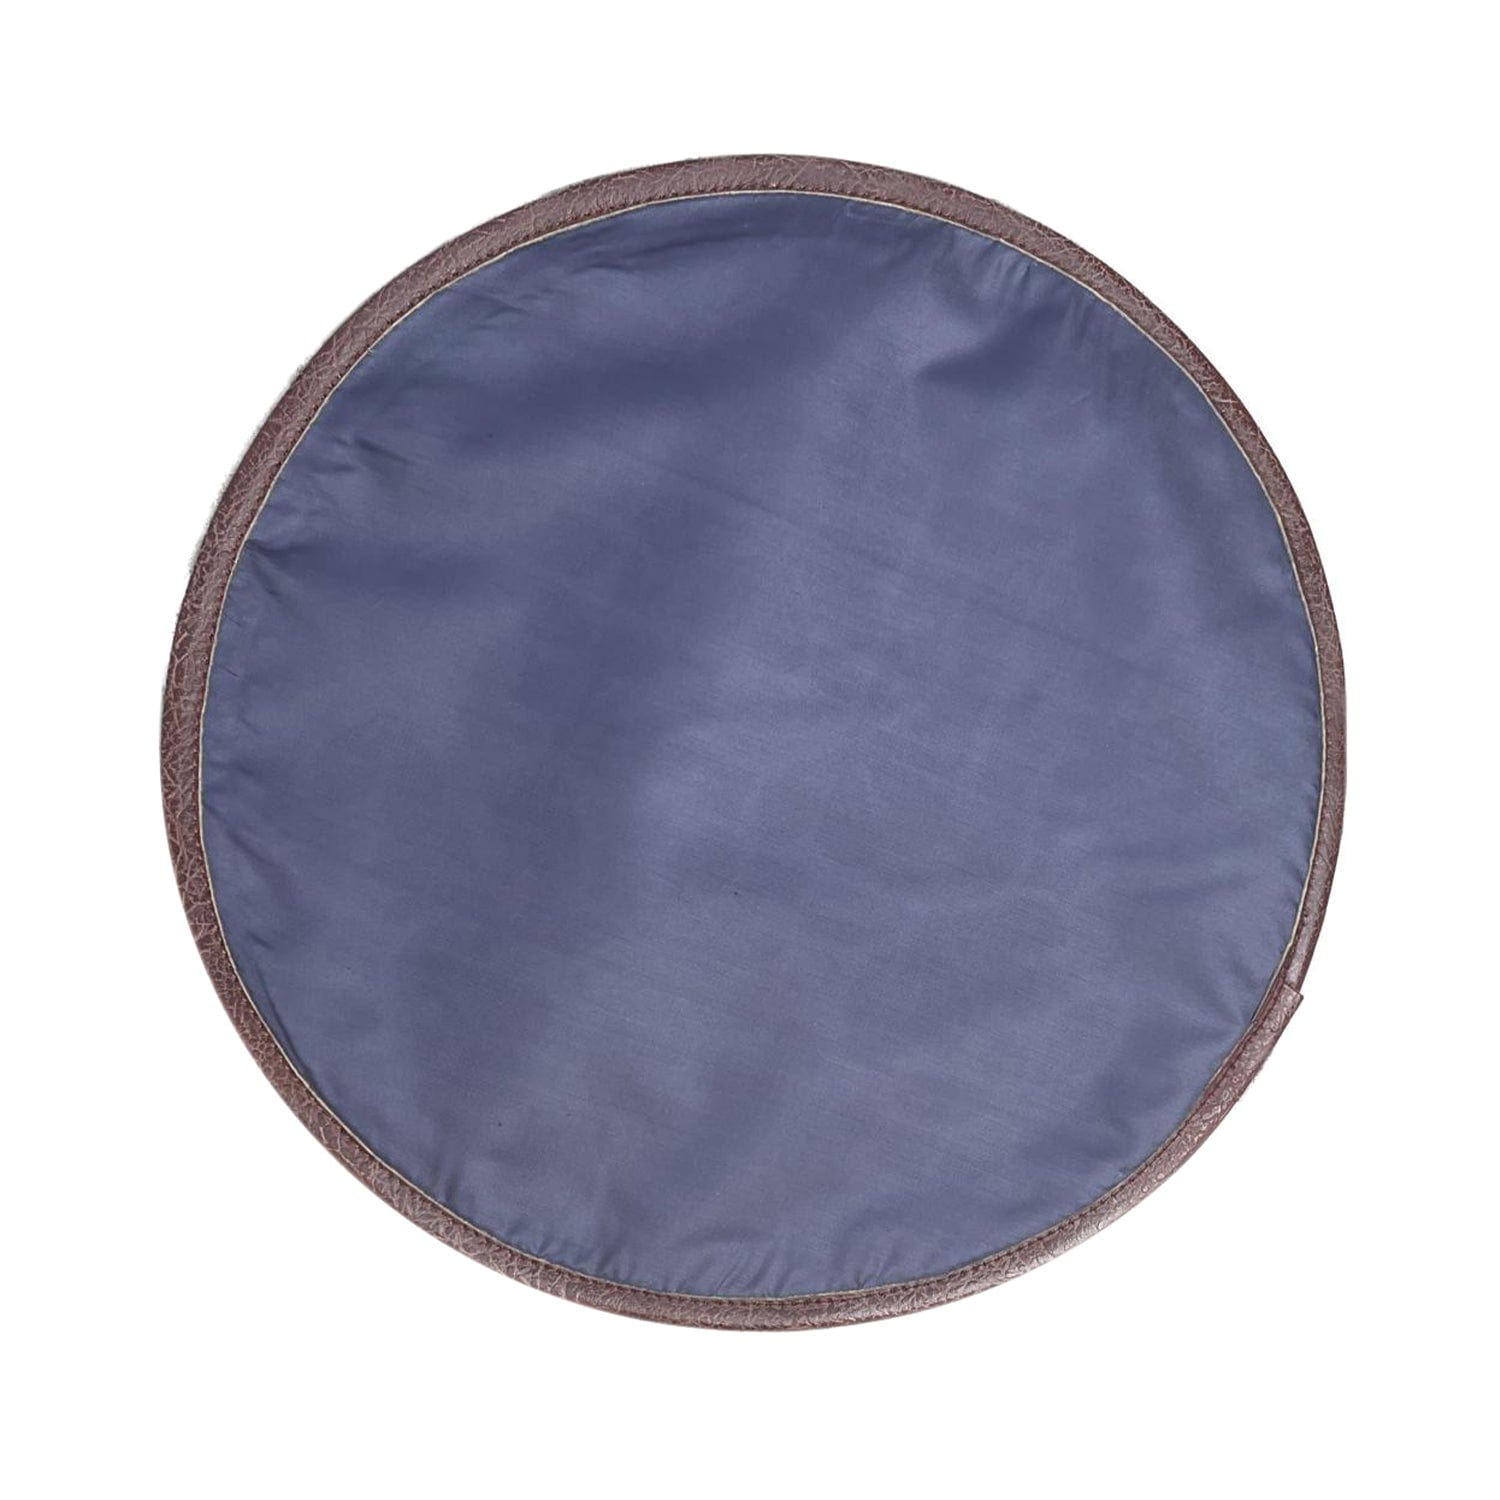 Mona B Set of 2 Printed Mosaic Placemats, 13 INCH Round, Best for Bed-Side Table/Center Table, Dining Table/Shelves (Aztec) - Placemat by Mona-B - Backpack, Flat30, New Arrivals, Sale, Shop1999, Shop2999, Shop3999